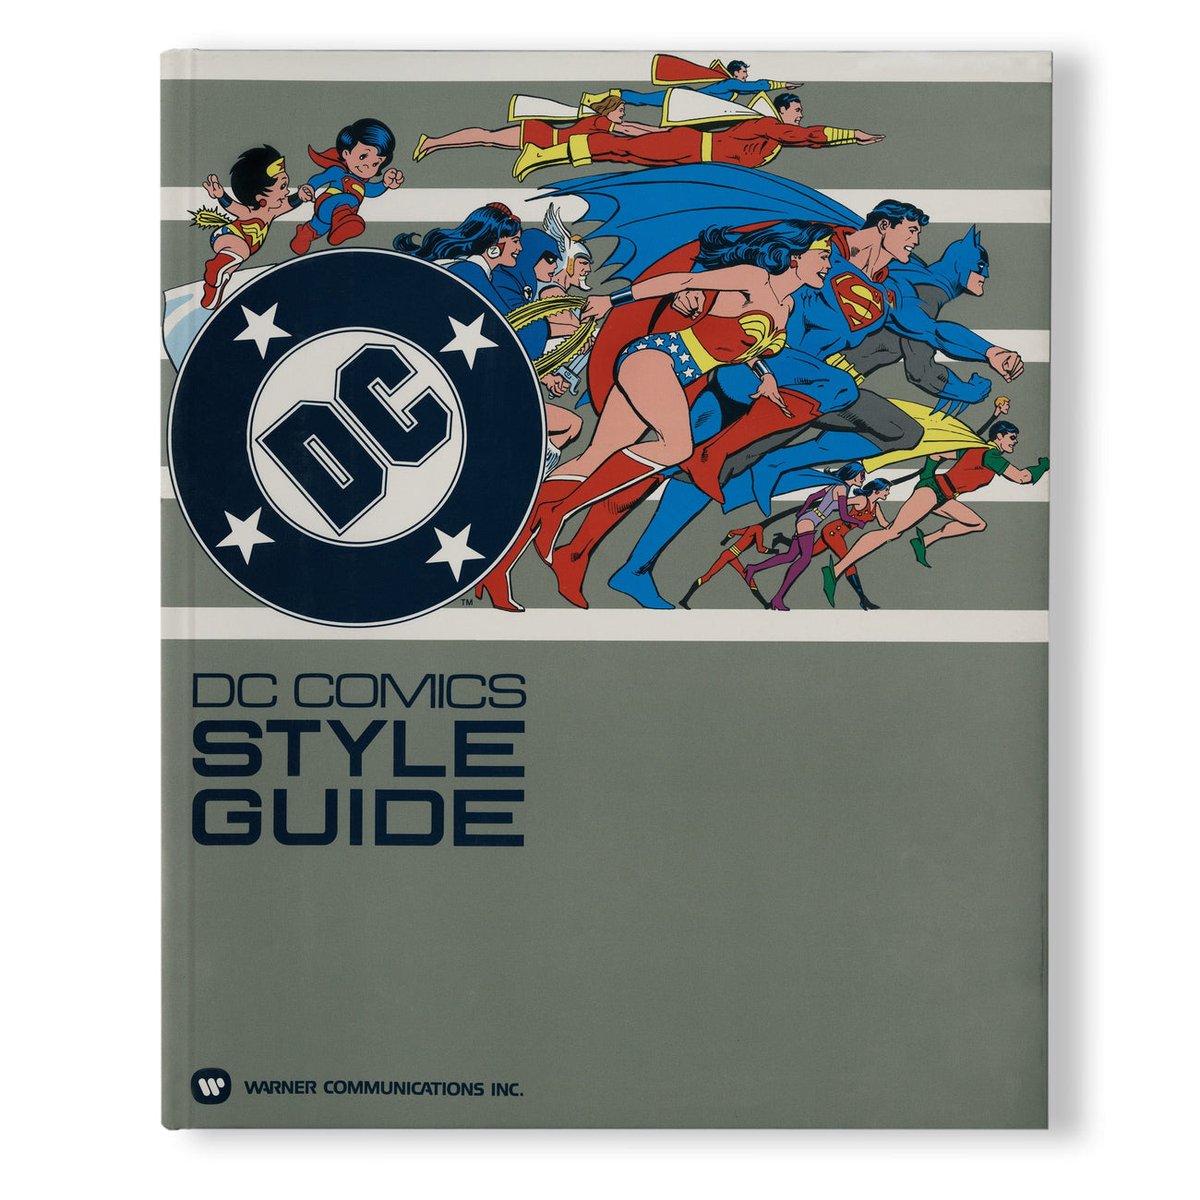 🔥🤯JUST ANNOUNCED!🤯🔥 The DC COMICS STYLE GUIDE from the early '80s, featuring all that iconic JOSE LUIS GARCIA-LOPEZ artwork is FINALLY being reproduced and released! Pre-Order now for THIRD EYE PICK-UP🛒 or THIRD EYE SHIPS📬 👉buythirdeyeordie.com/dcstyleguide